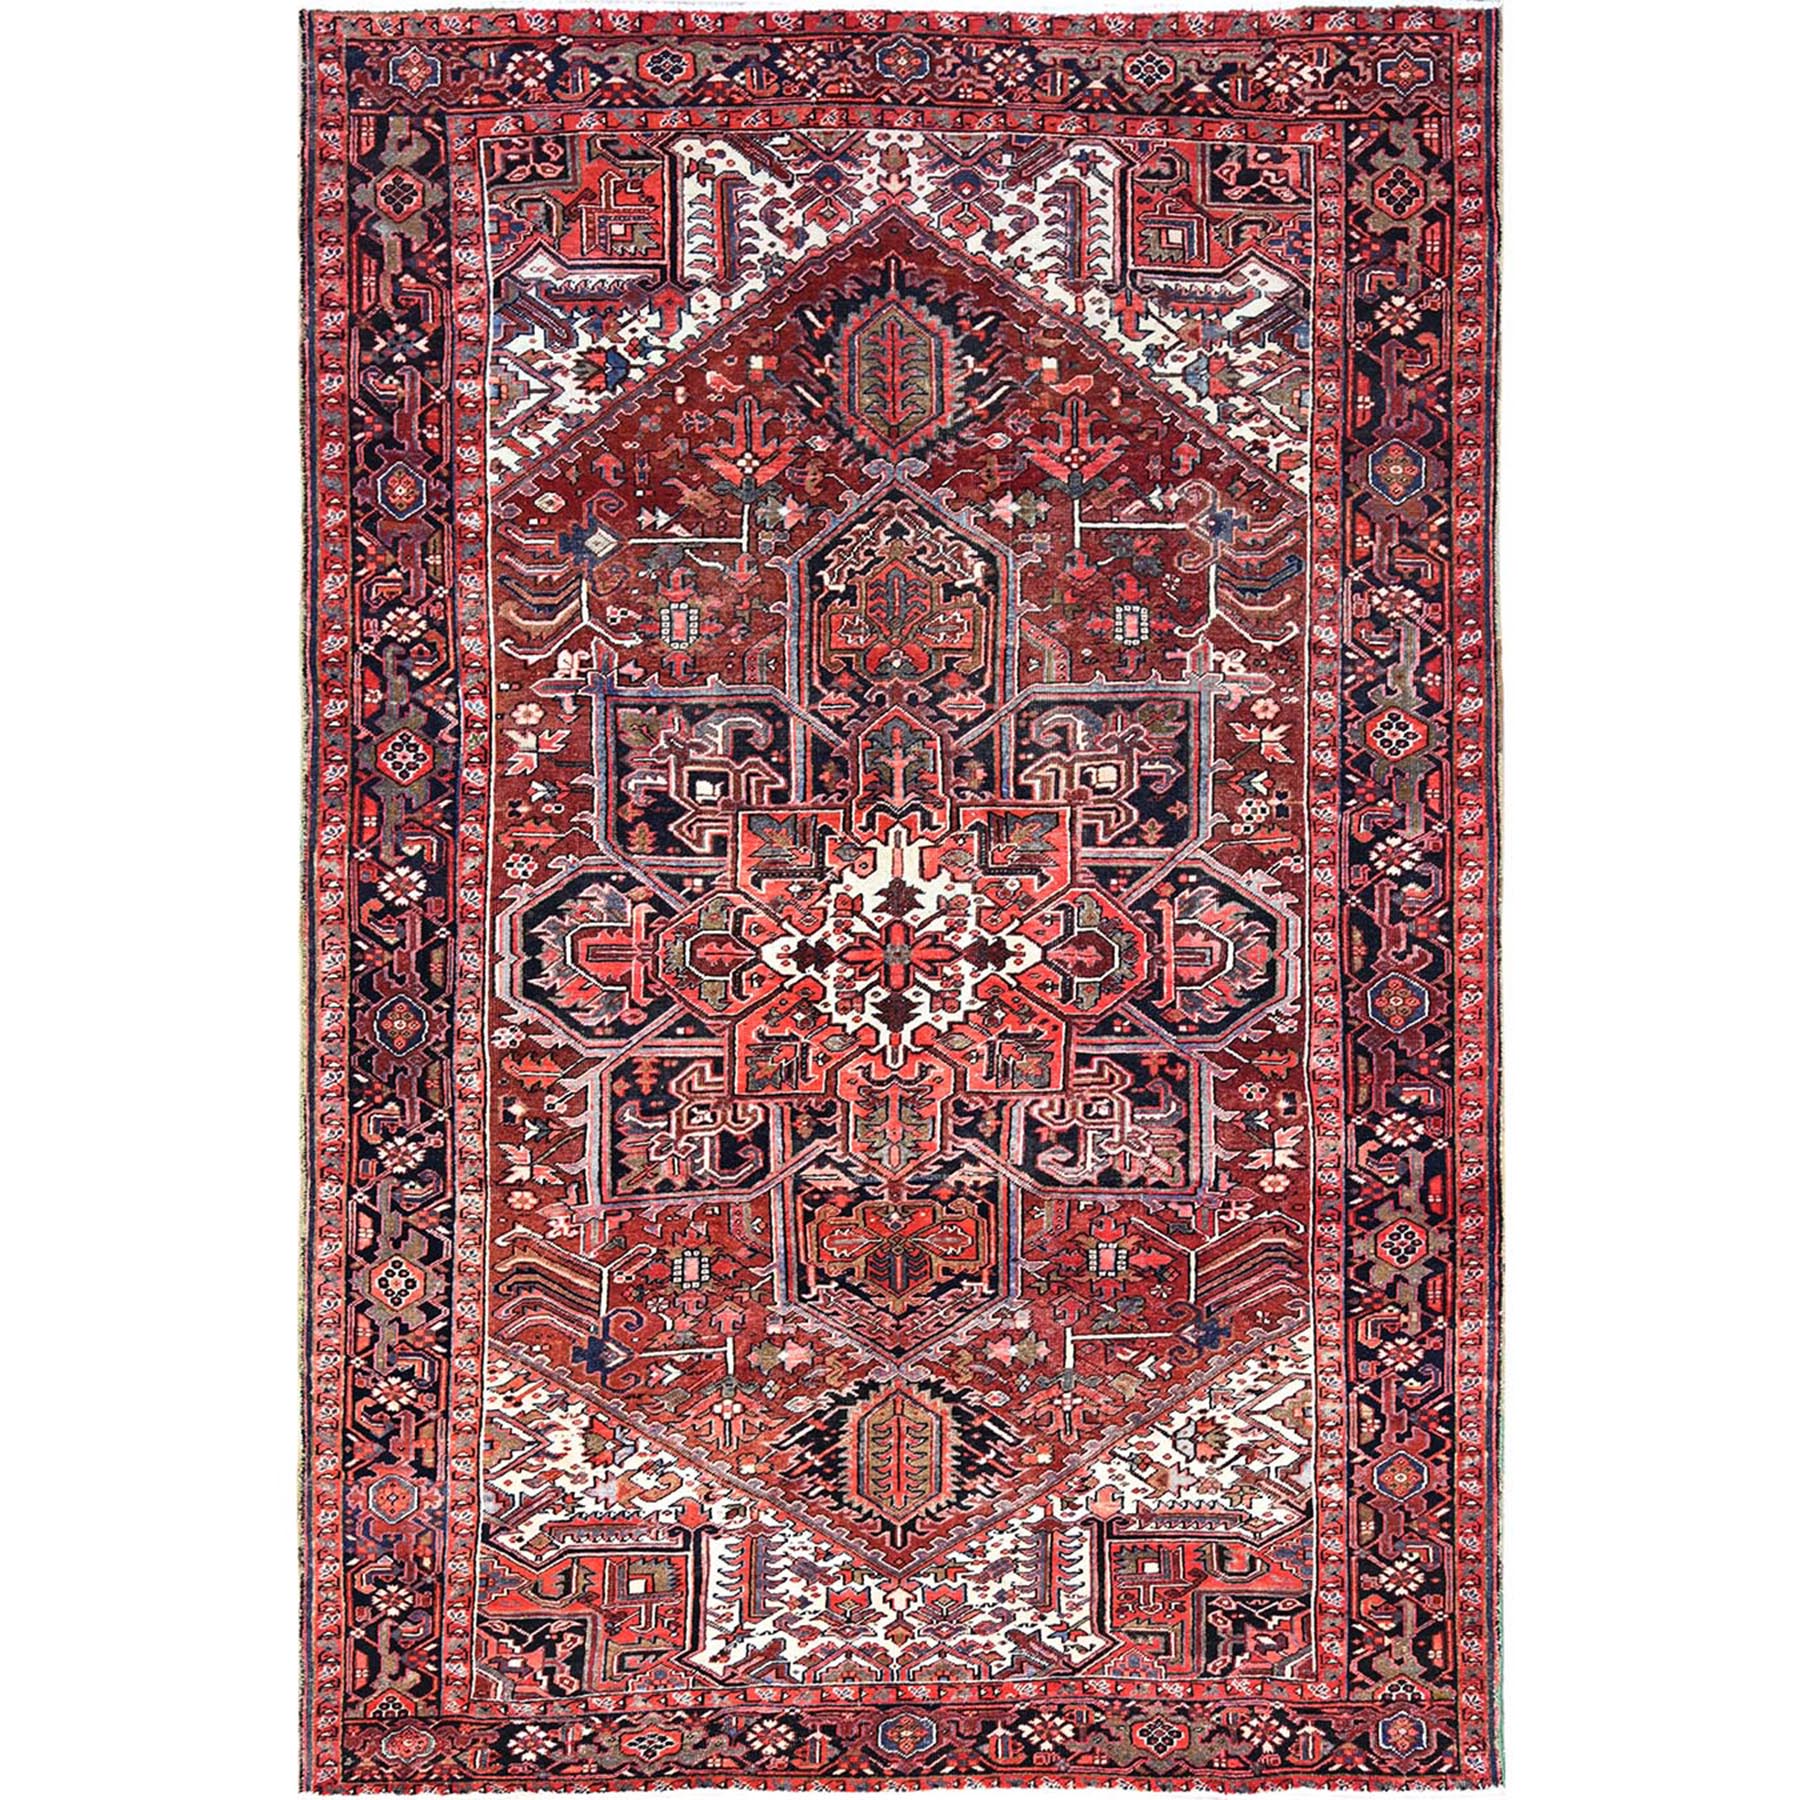  Wool Hand-Knotted Area Rug 7'11